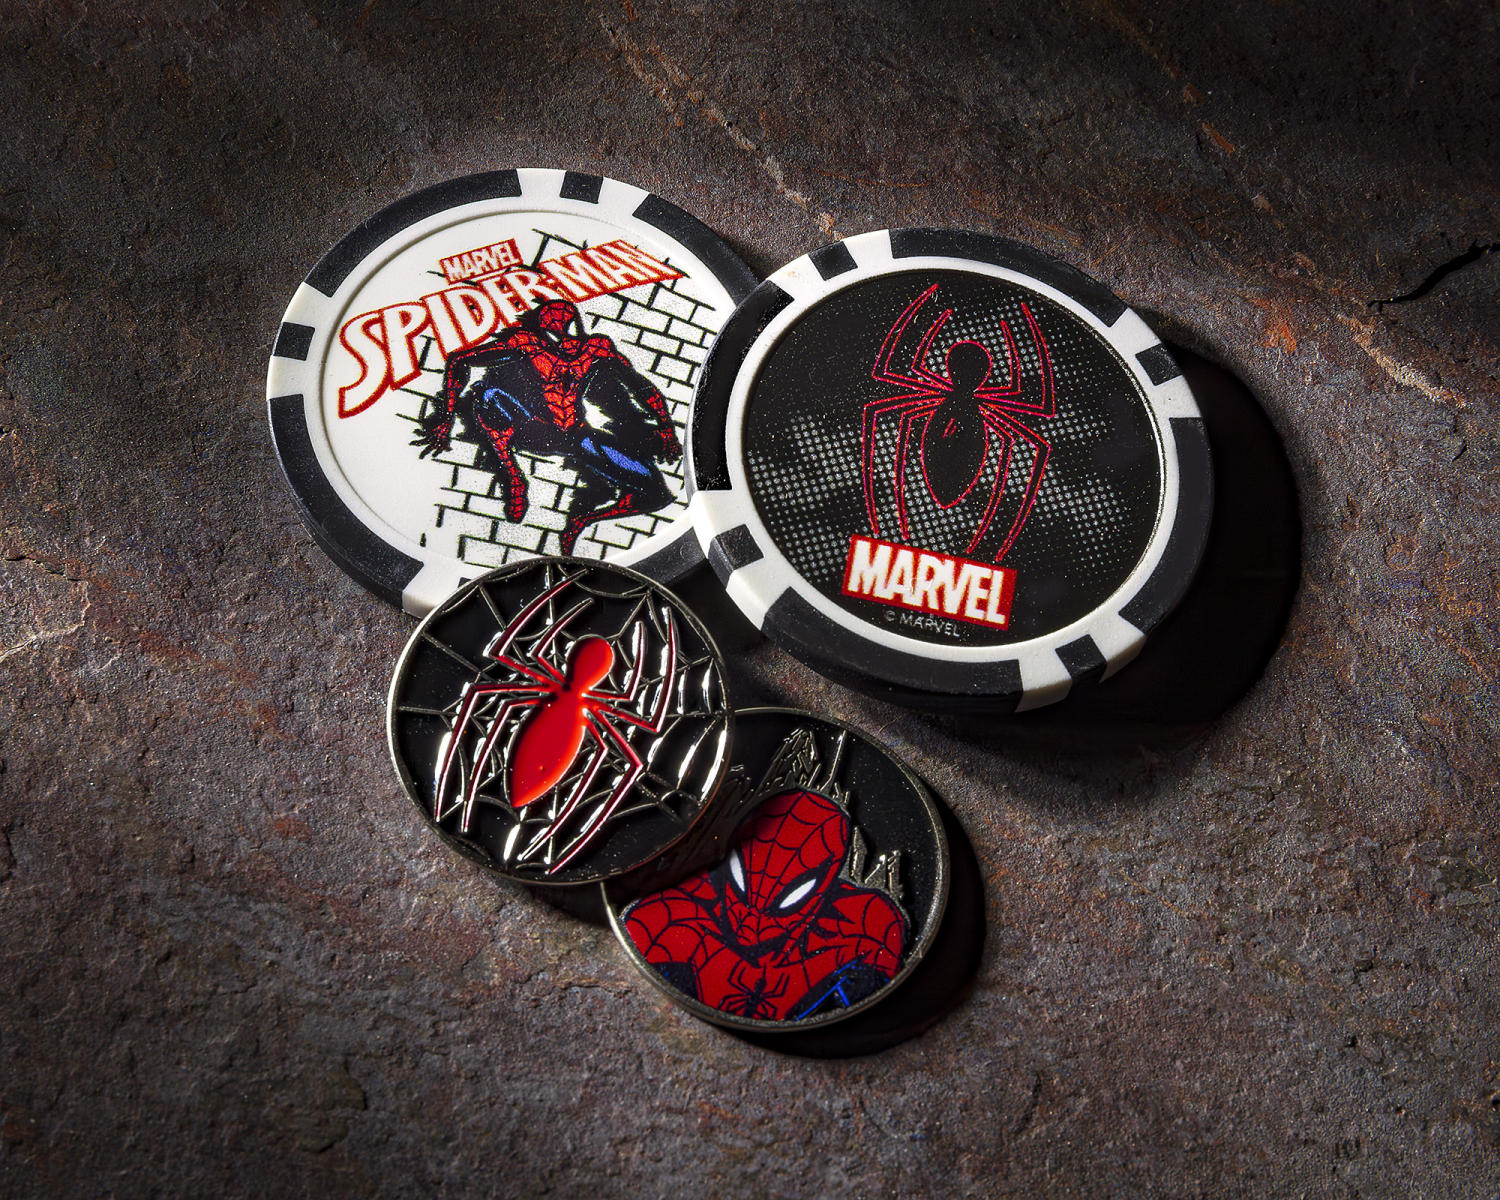 Marvel Ball Markers